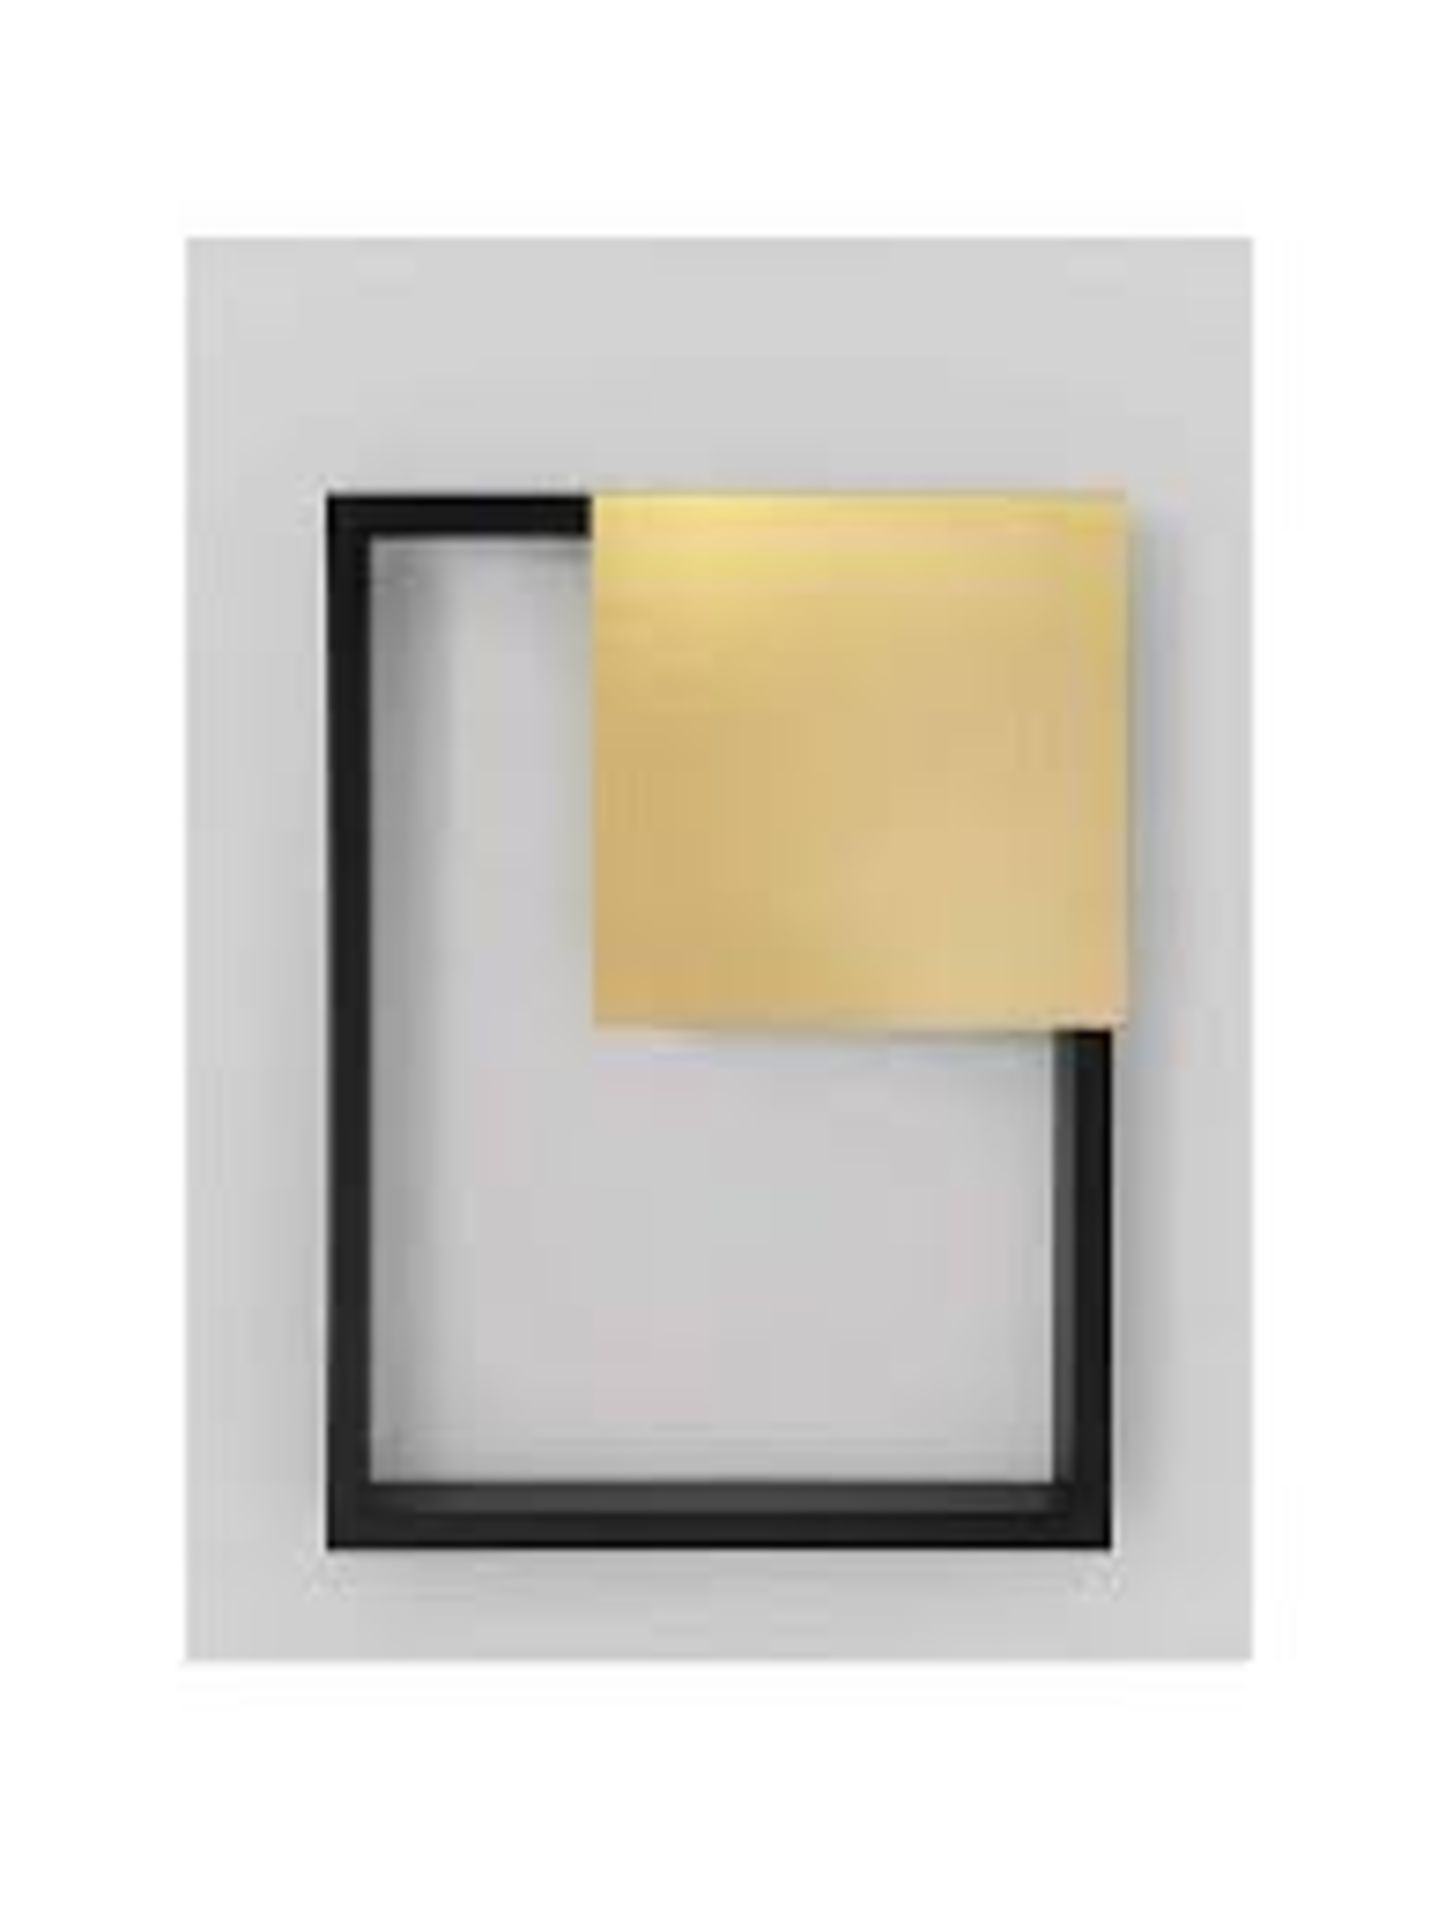 | 1x | SWOON CADREW WALL LAMP BLACK | BOXED | SKU - | RRP £ 99 |